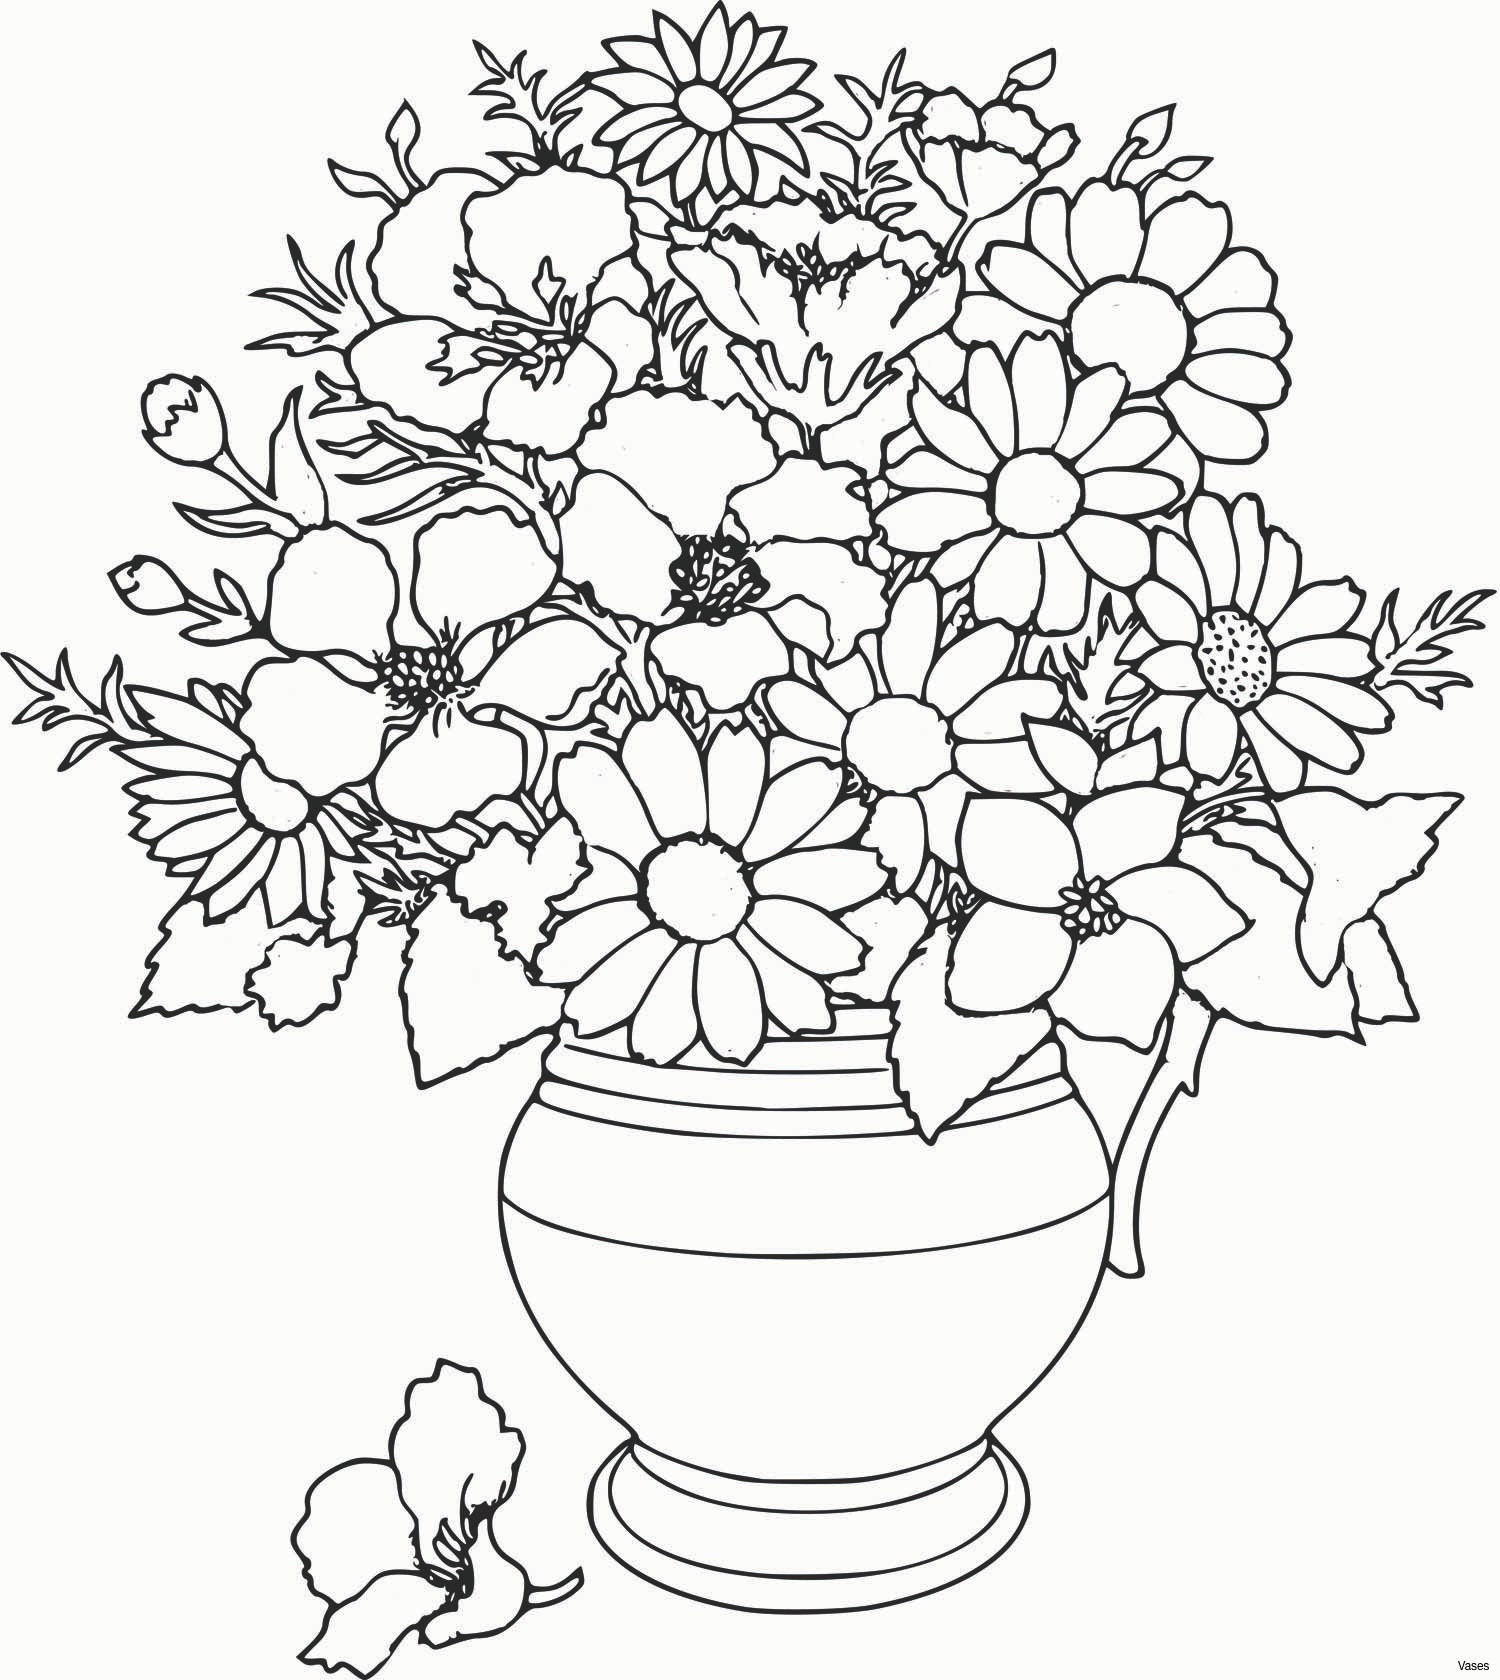 28 Recommended Green Flower Vases for Sale 2024 free download green flower vases for sale of unique flowers with vases beginneryogaclassesnear me pertaining to coloring pages roses new vases flower vase coloring page pages flowers in a top i 0d